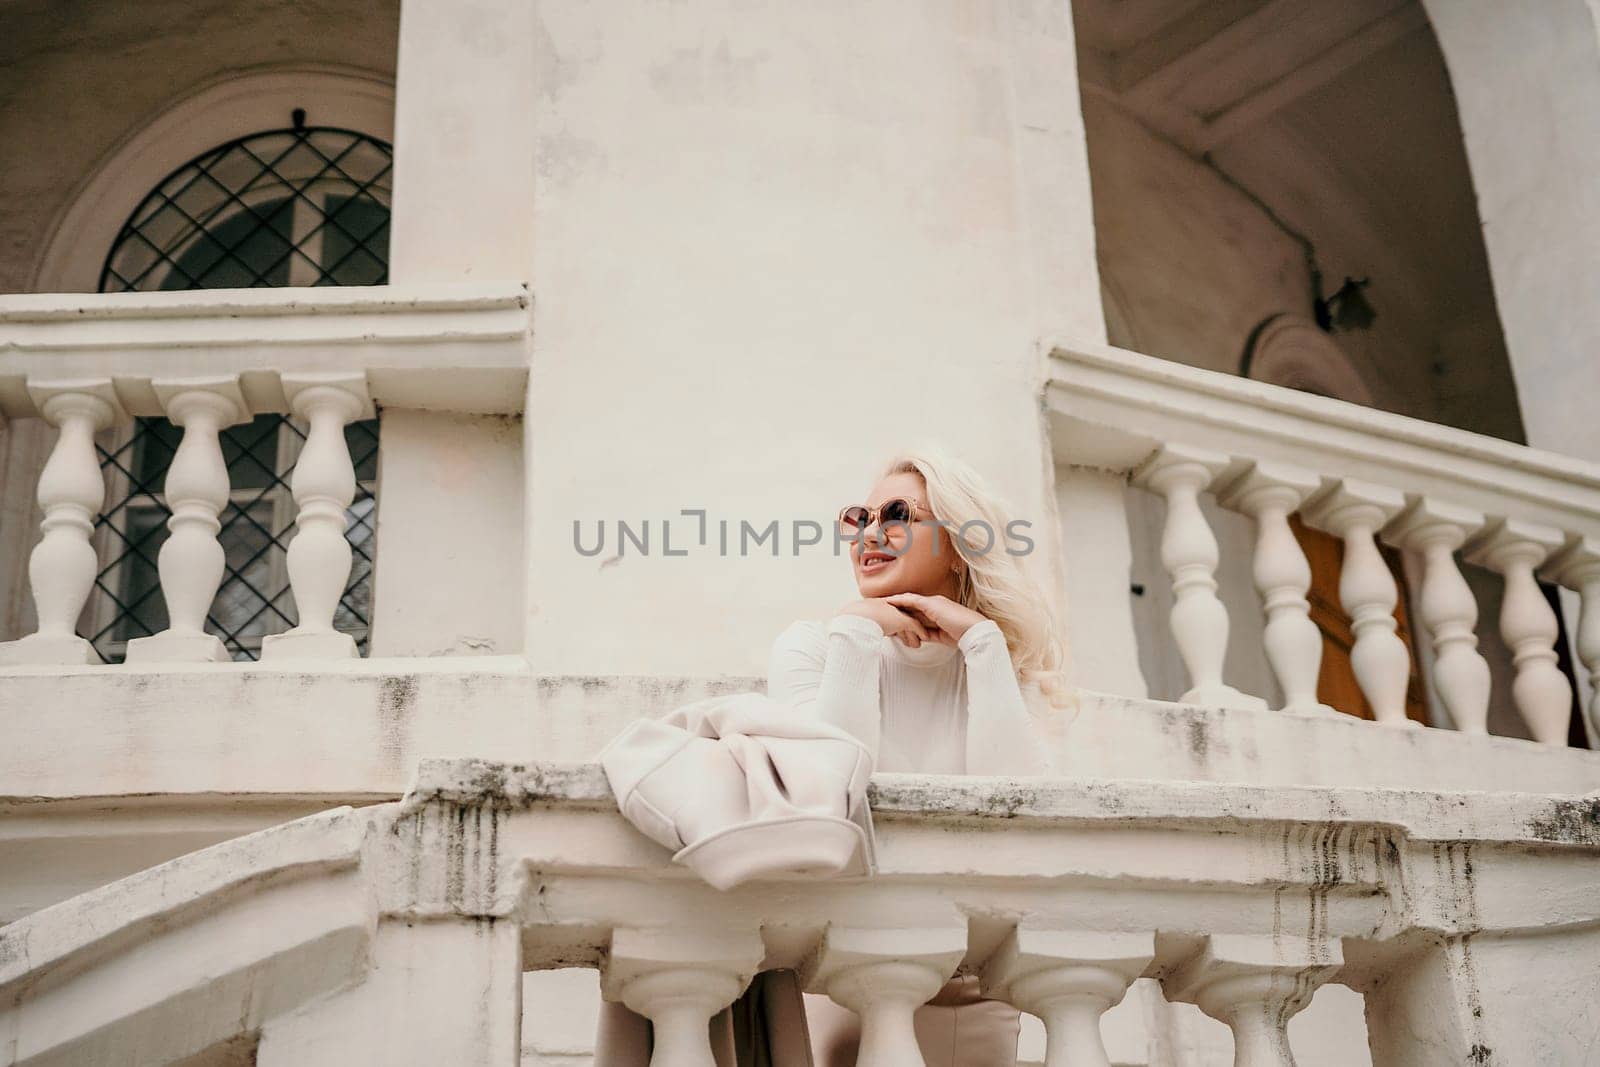 A woman is sitting on a white railing, looking out at the street. She is wearing sunglasses and a white shirt. The scene is set in front of a building with white pillars